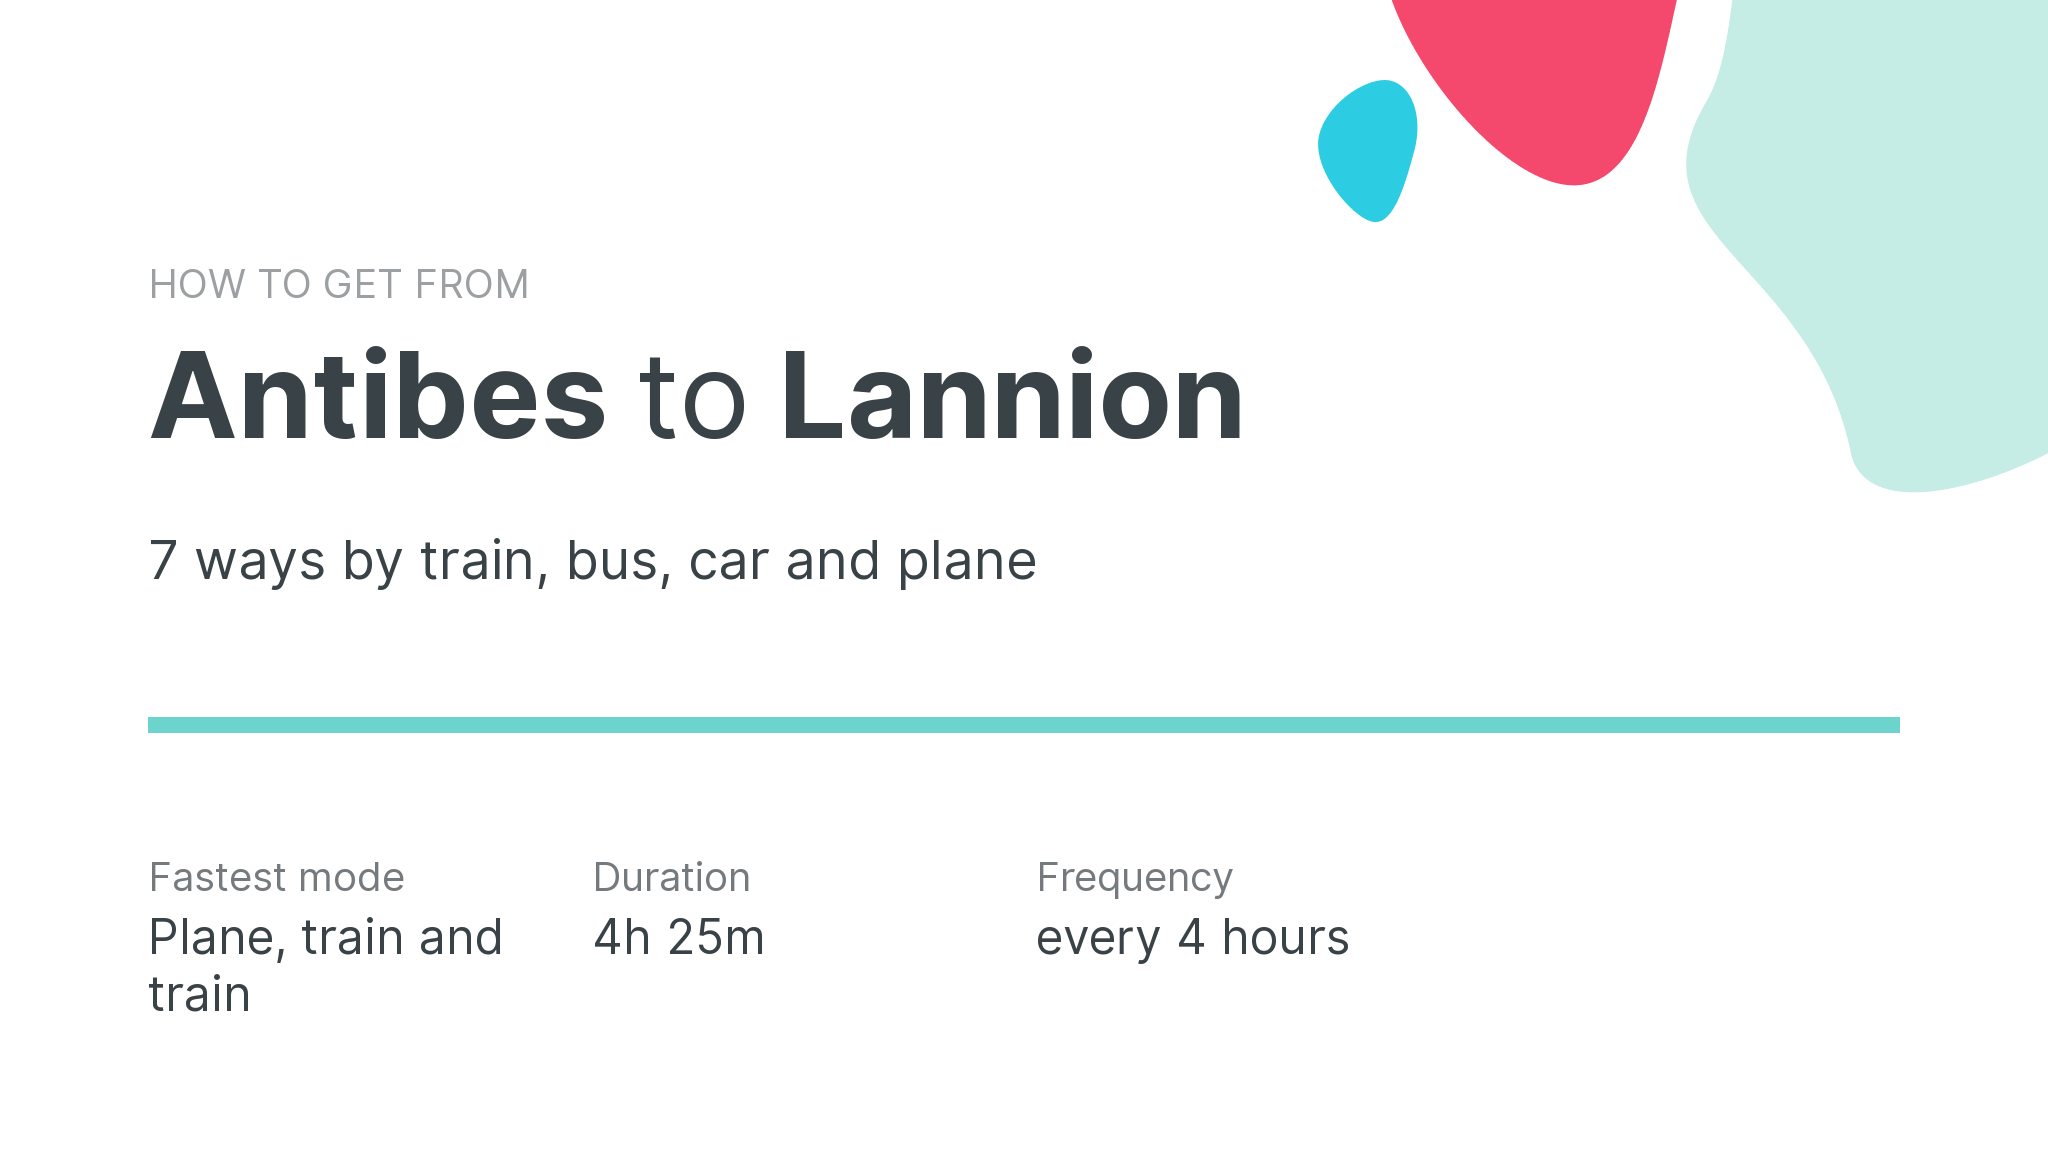 How do I get from Antibes to Lannion